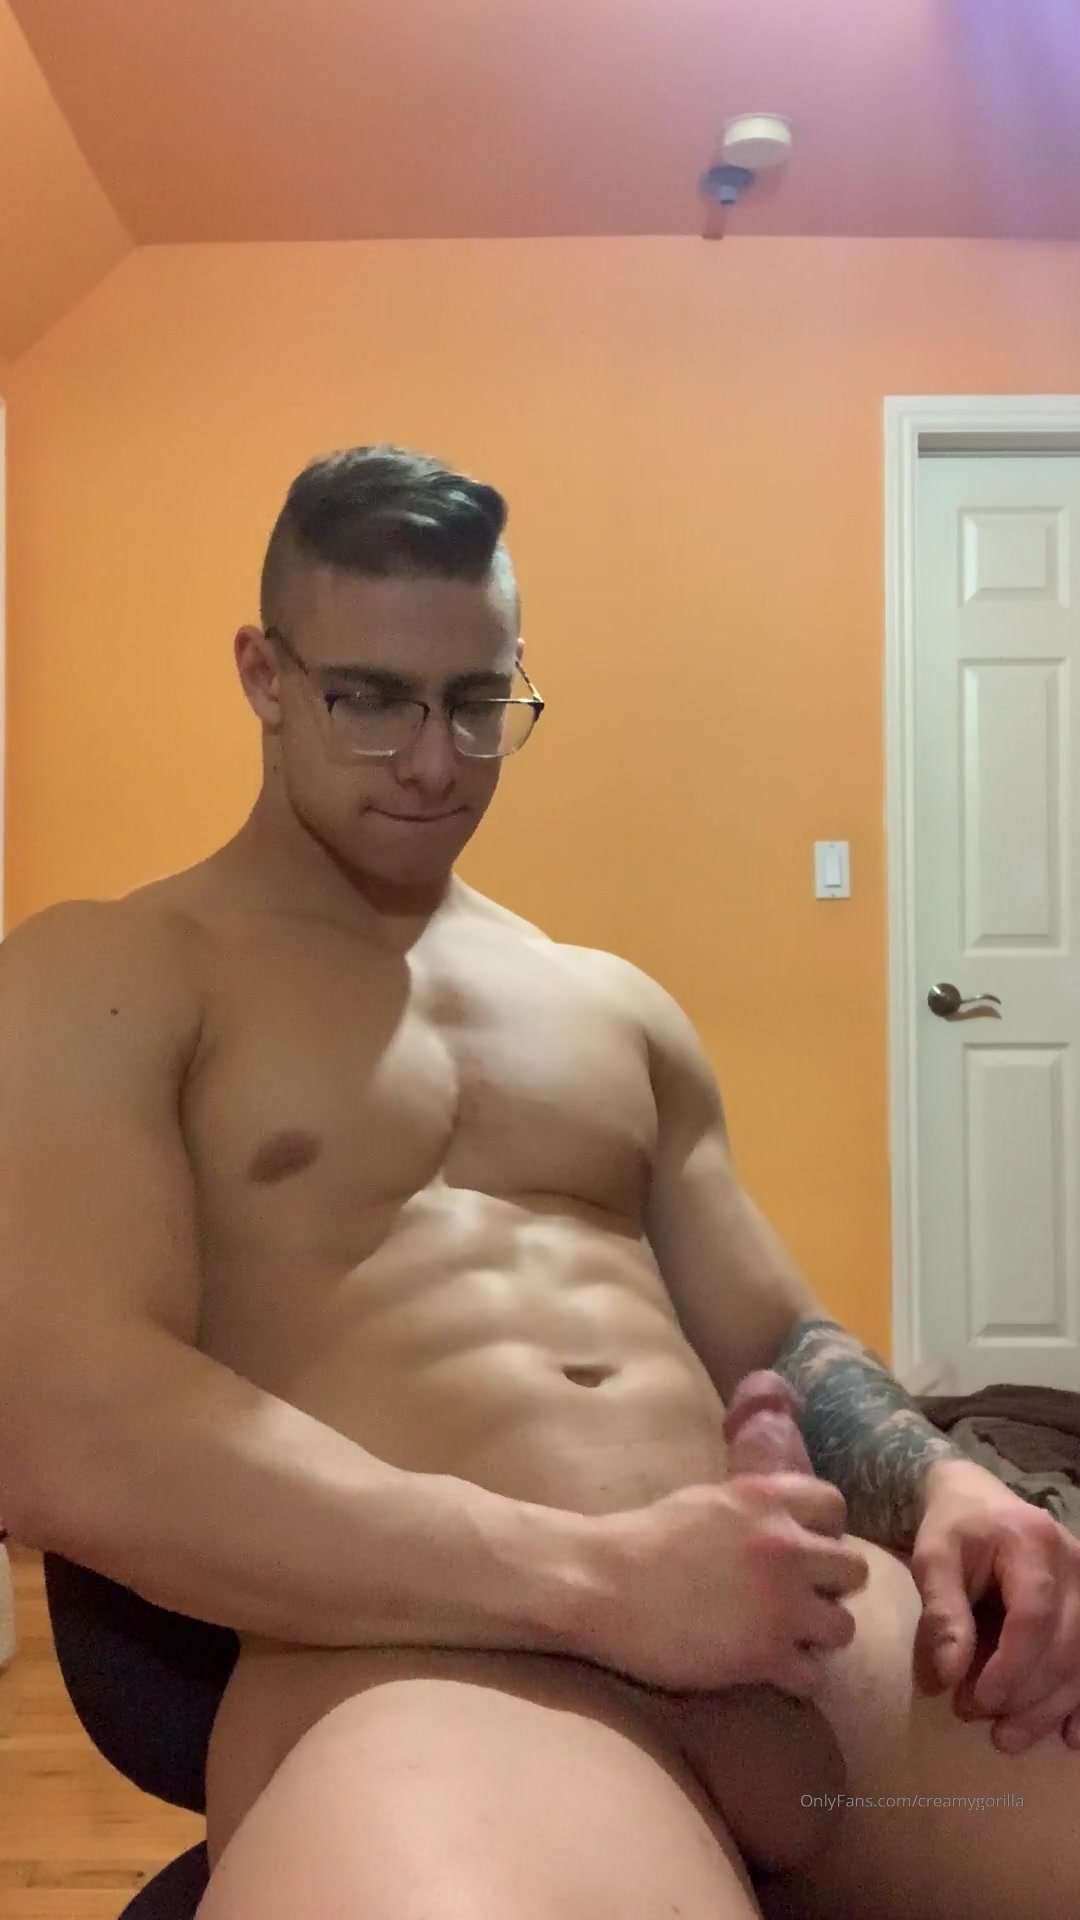 STRAIGHT MUSCLE BOY CUMMING ON CHEST